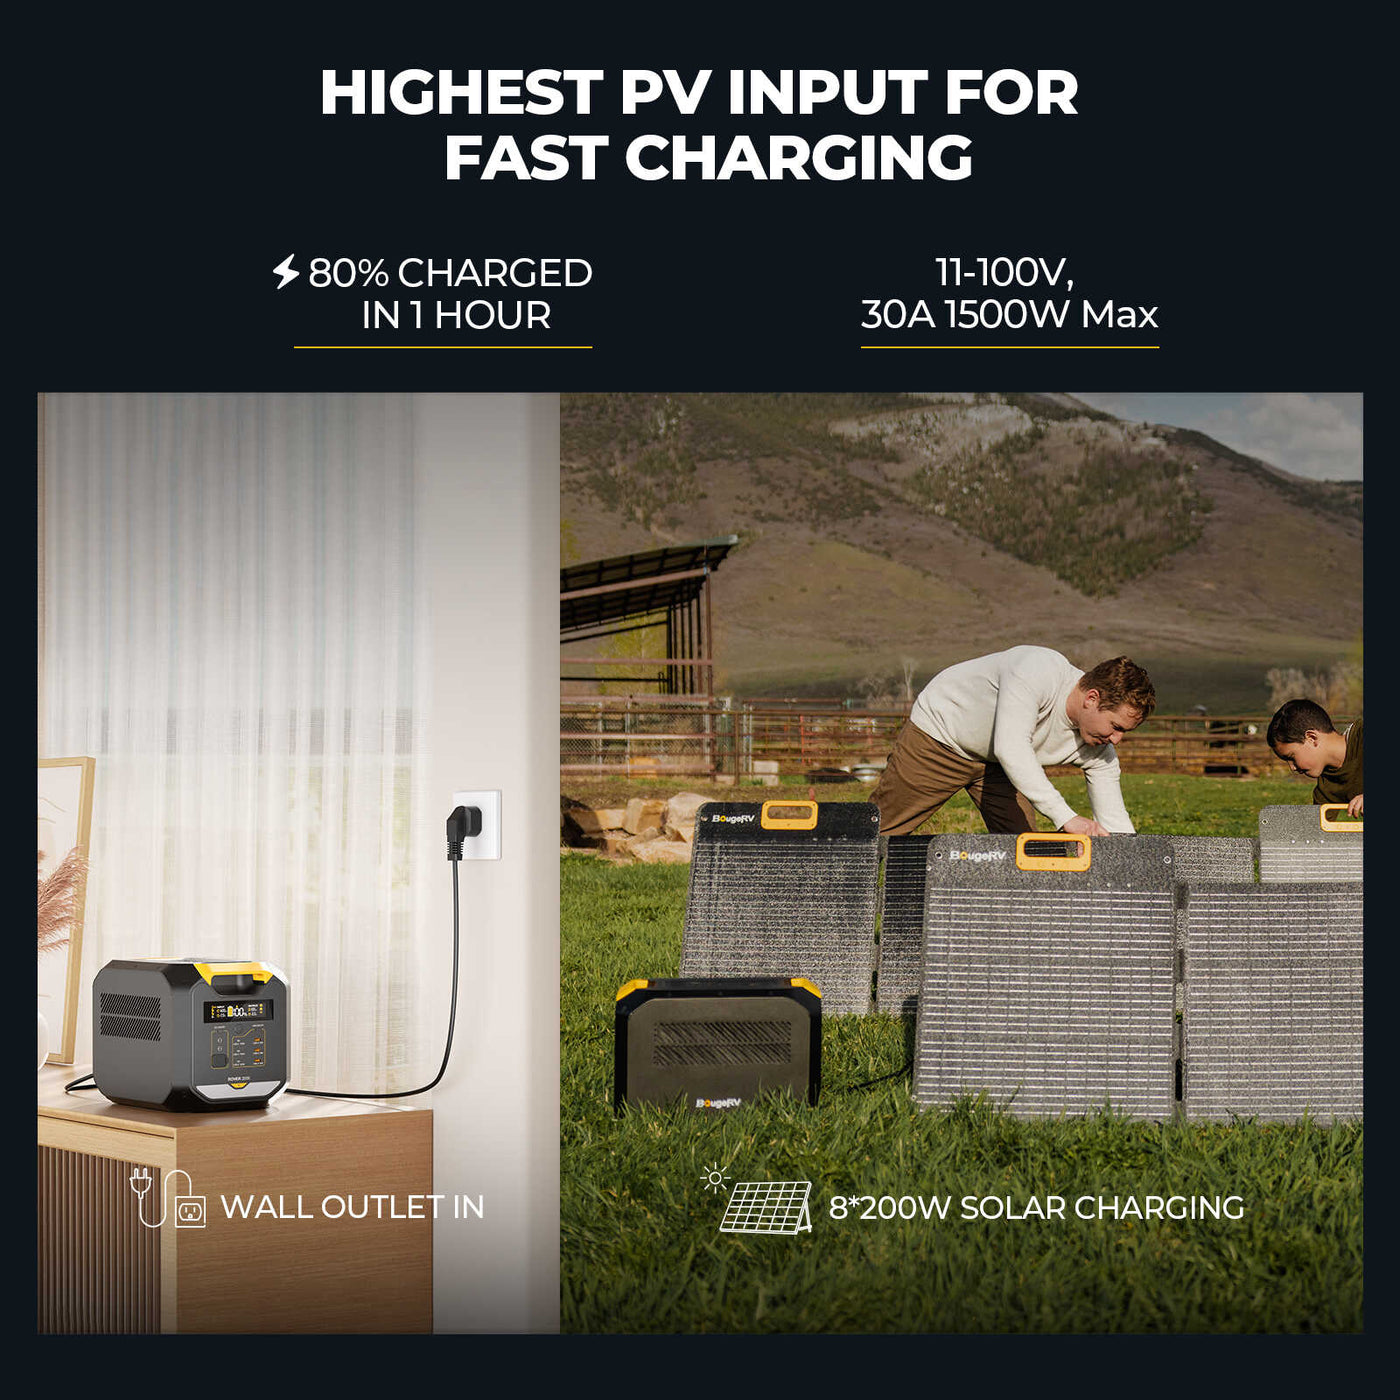 ROVER2000 Semi-Solid State Portable Power Station: fast charging